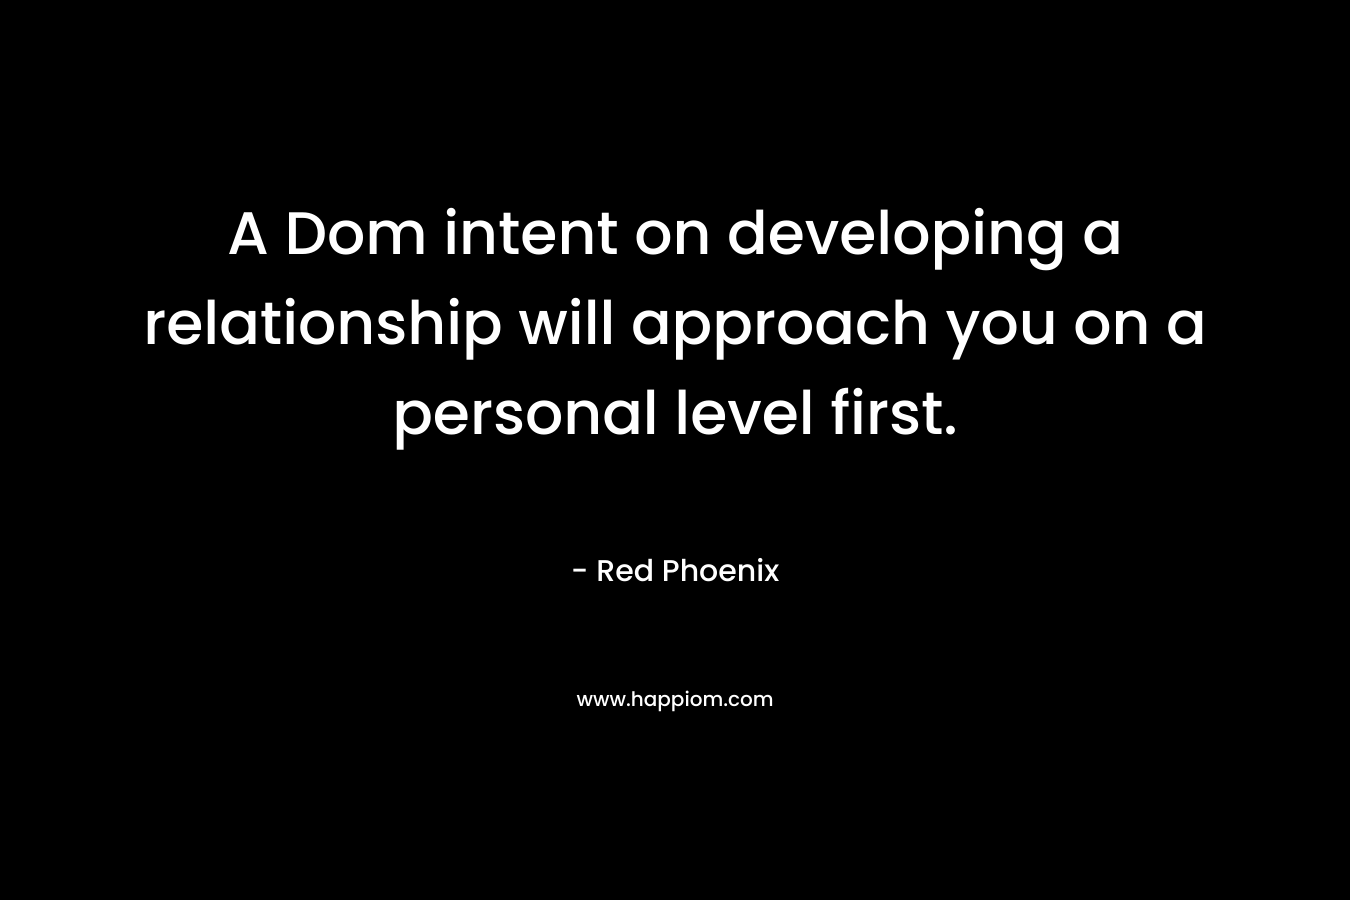 A Dom intent on developing a relationship will approach you on a personal level first. – Red Phoenix